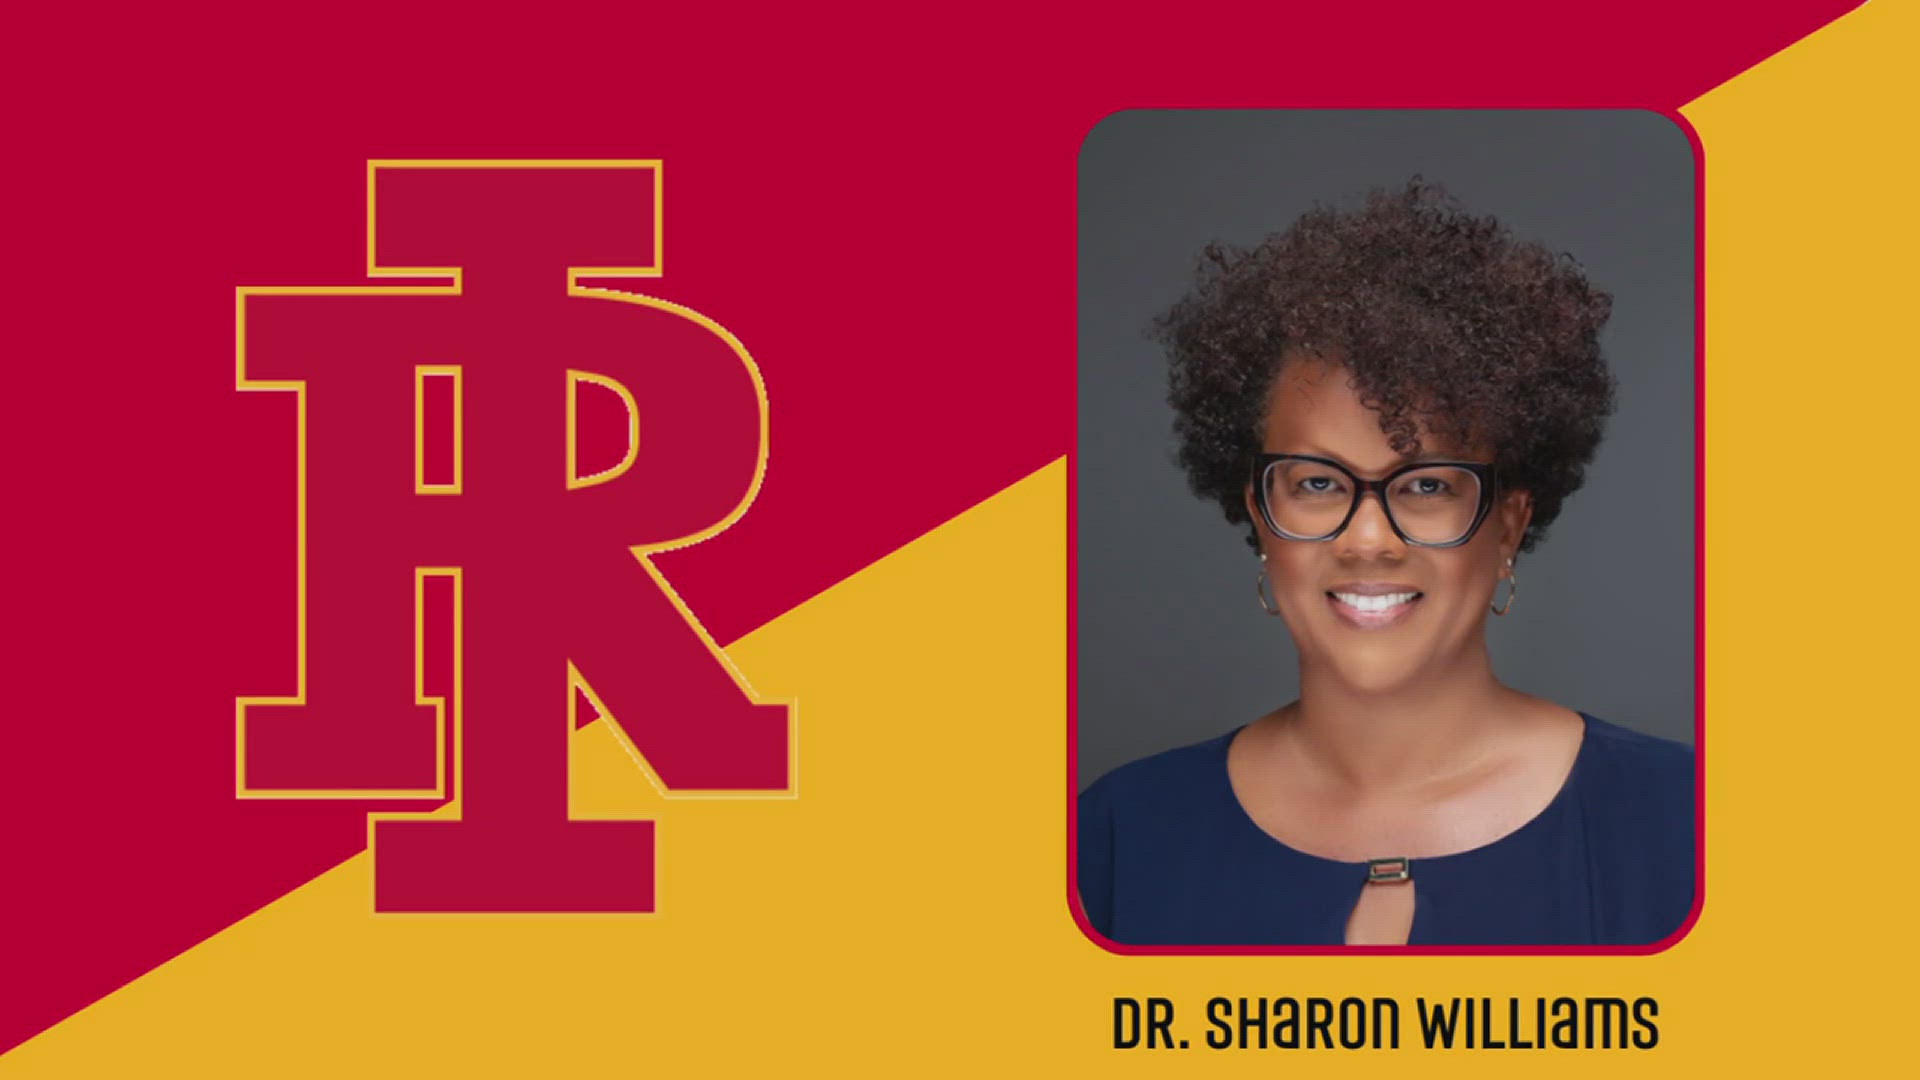 Community members can meet Dr. Sharon Williams at the Rock Island Hy-Vee between 8 a.m. and 9 a.m. on Tuesday morning.